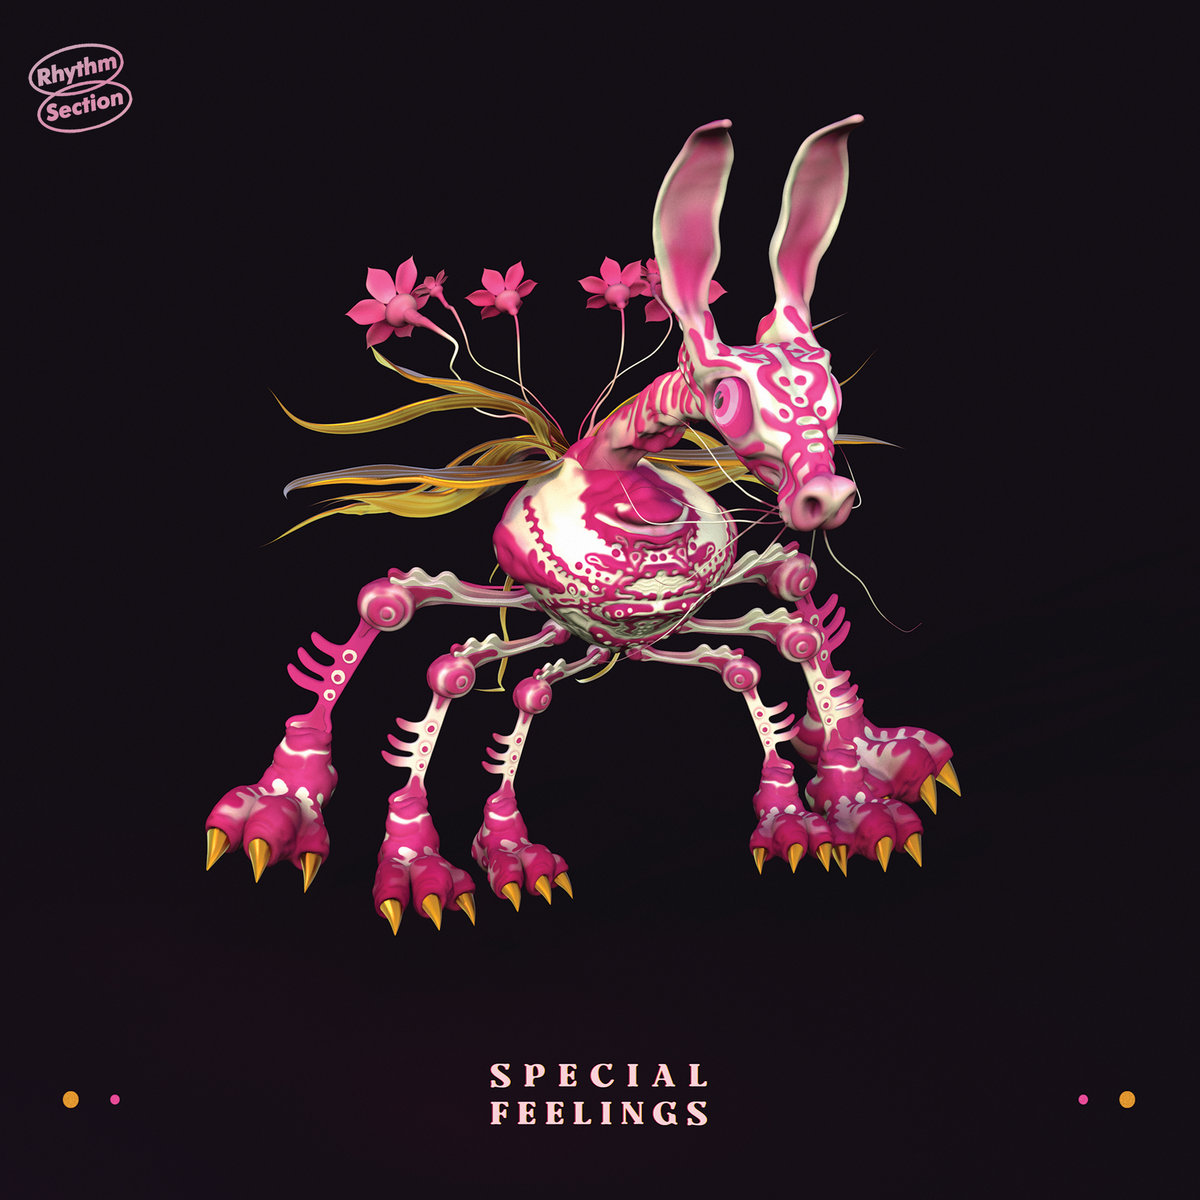 An album cover from the band 'Soecial Feelings. Floating on a black background, is a pink fantasy horse-like creature with six legs and flowers growing from its tail. 